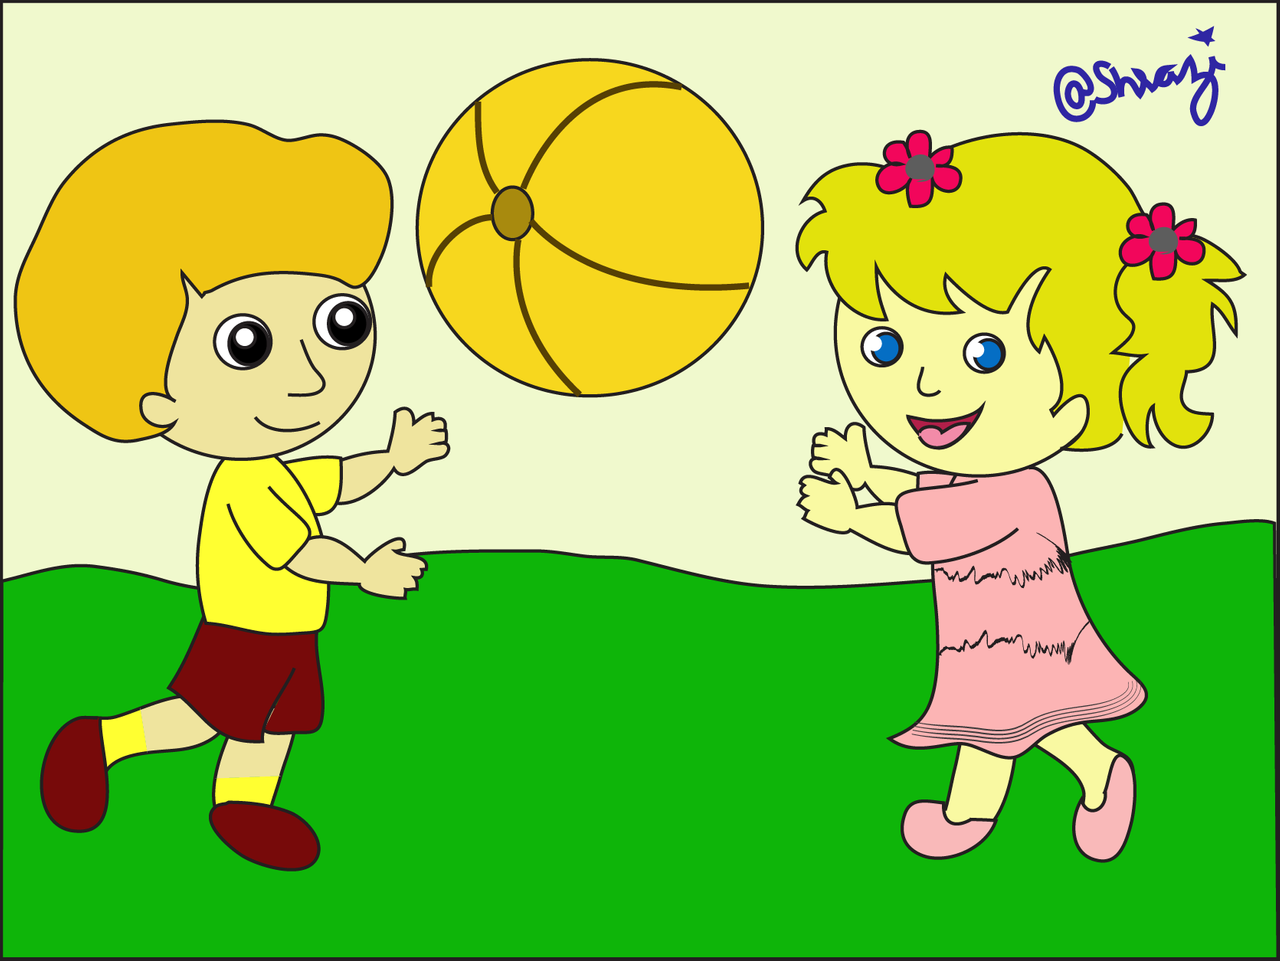 ball drawing for kids